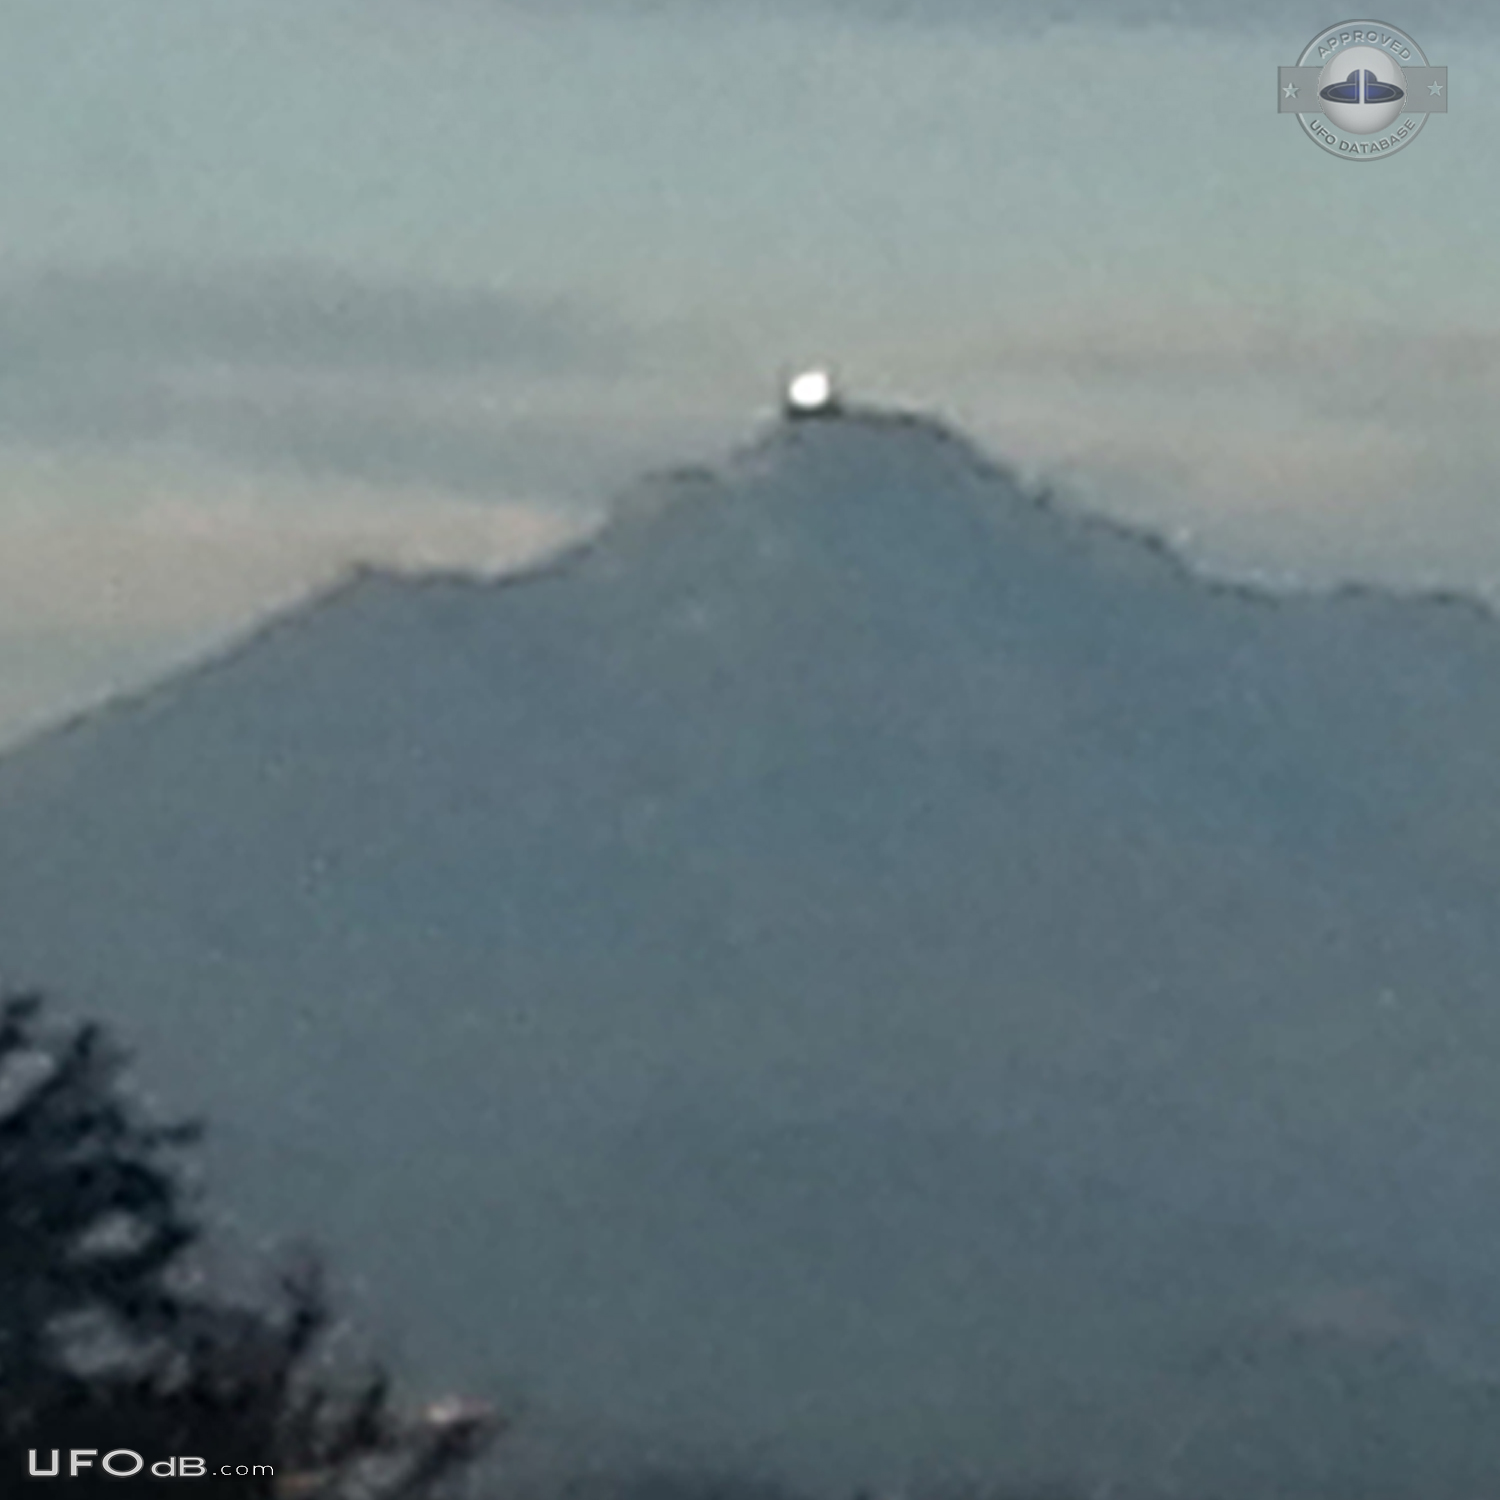 Looked to mountain. saw gigantic hovering ufo - Lake Stevens USA 2015 UFO Picture #703-4